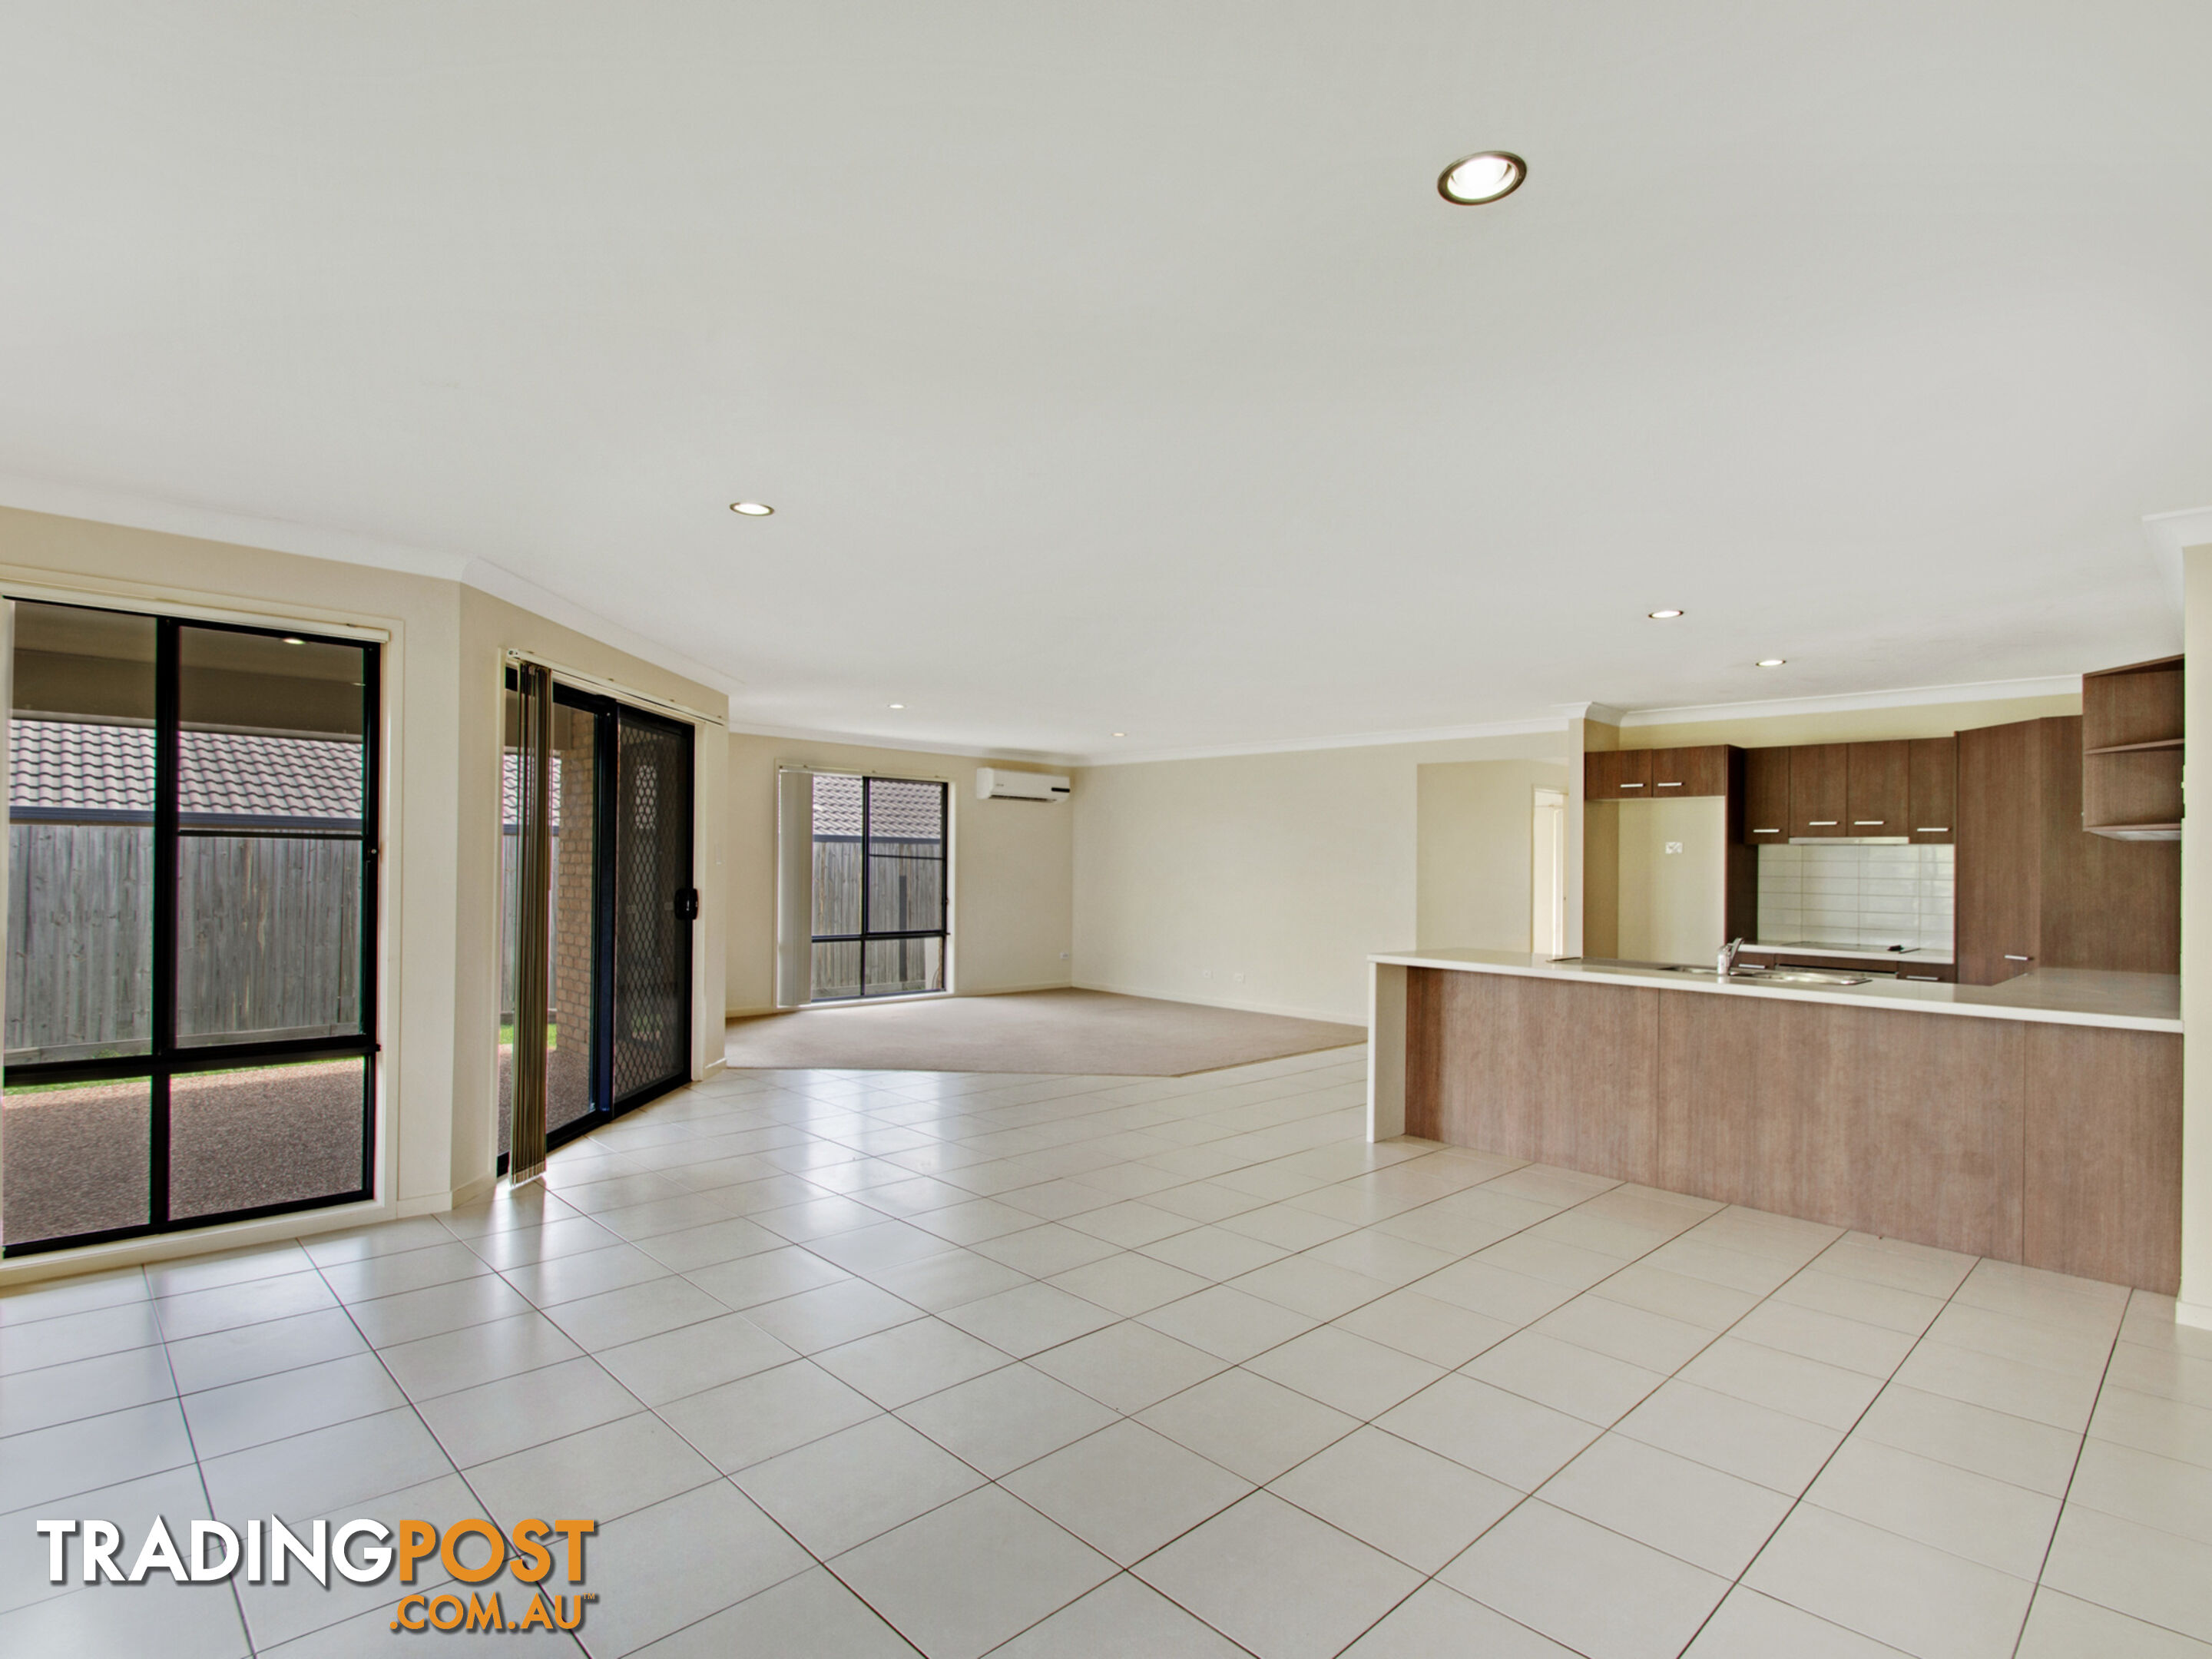 559 Connors Road HELIDON QLD 4344